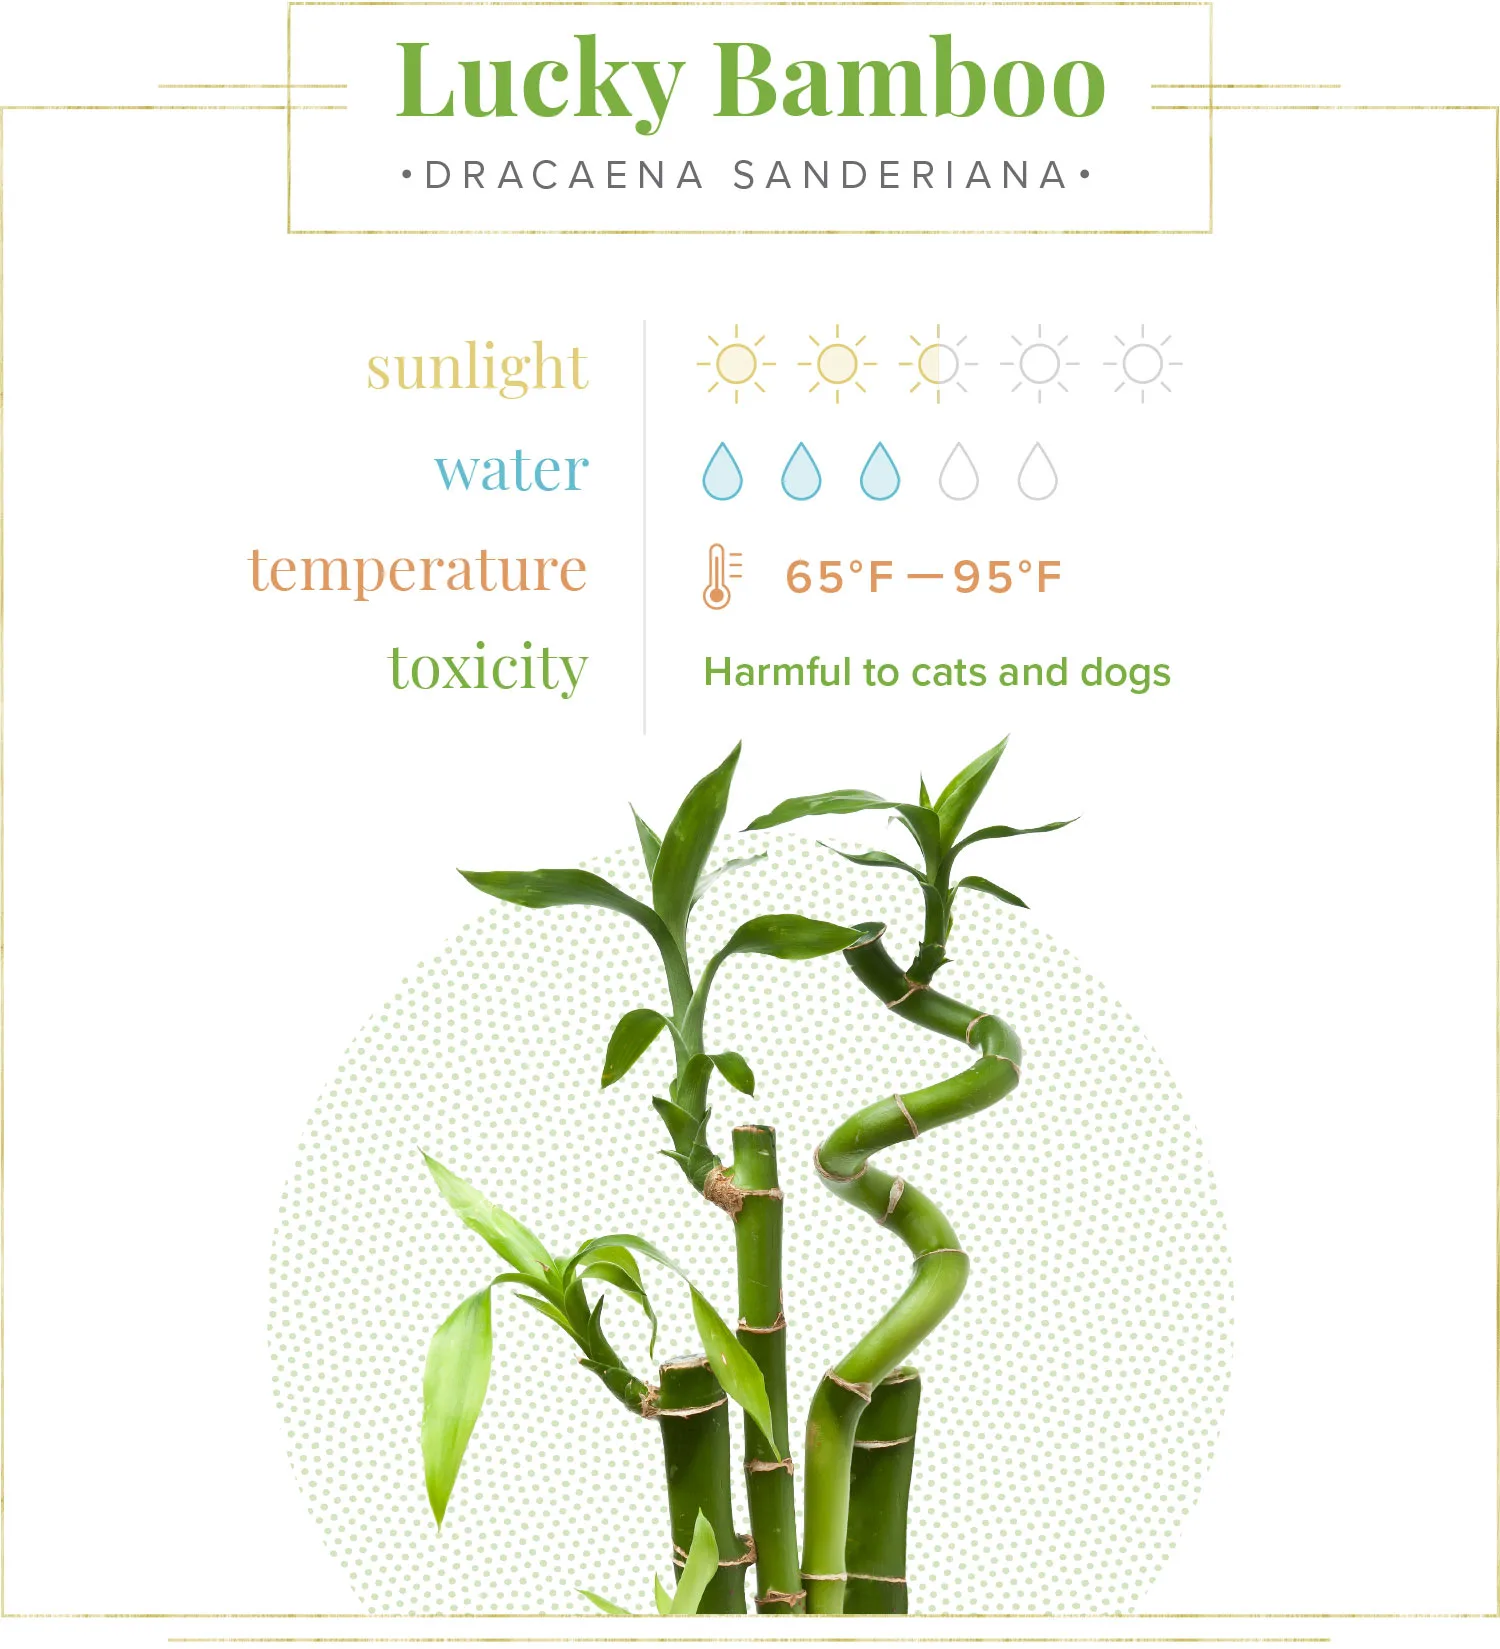 bamboo-care-guide-quick-guide